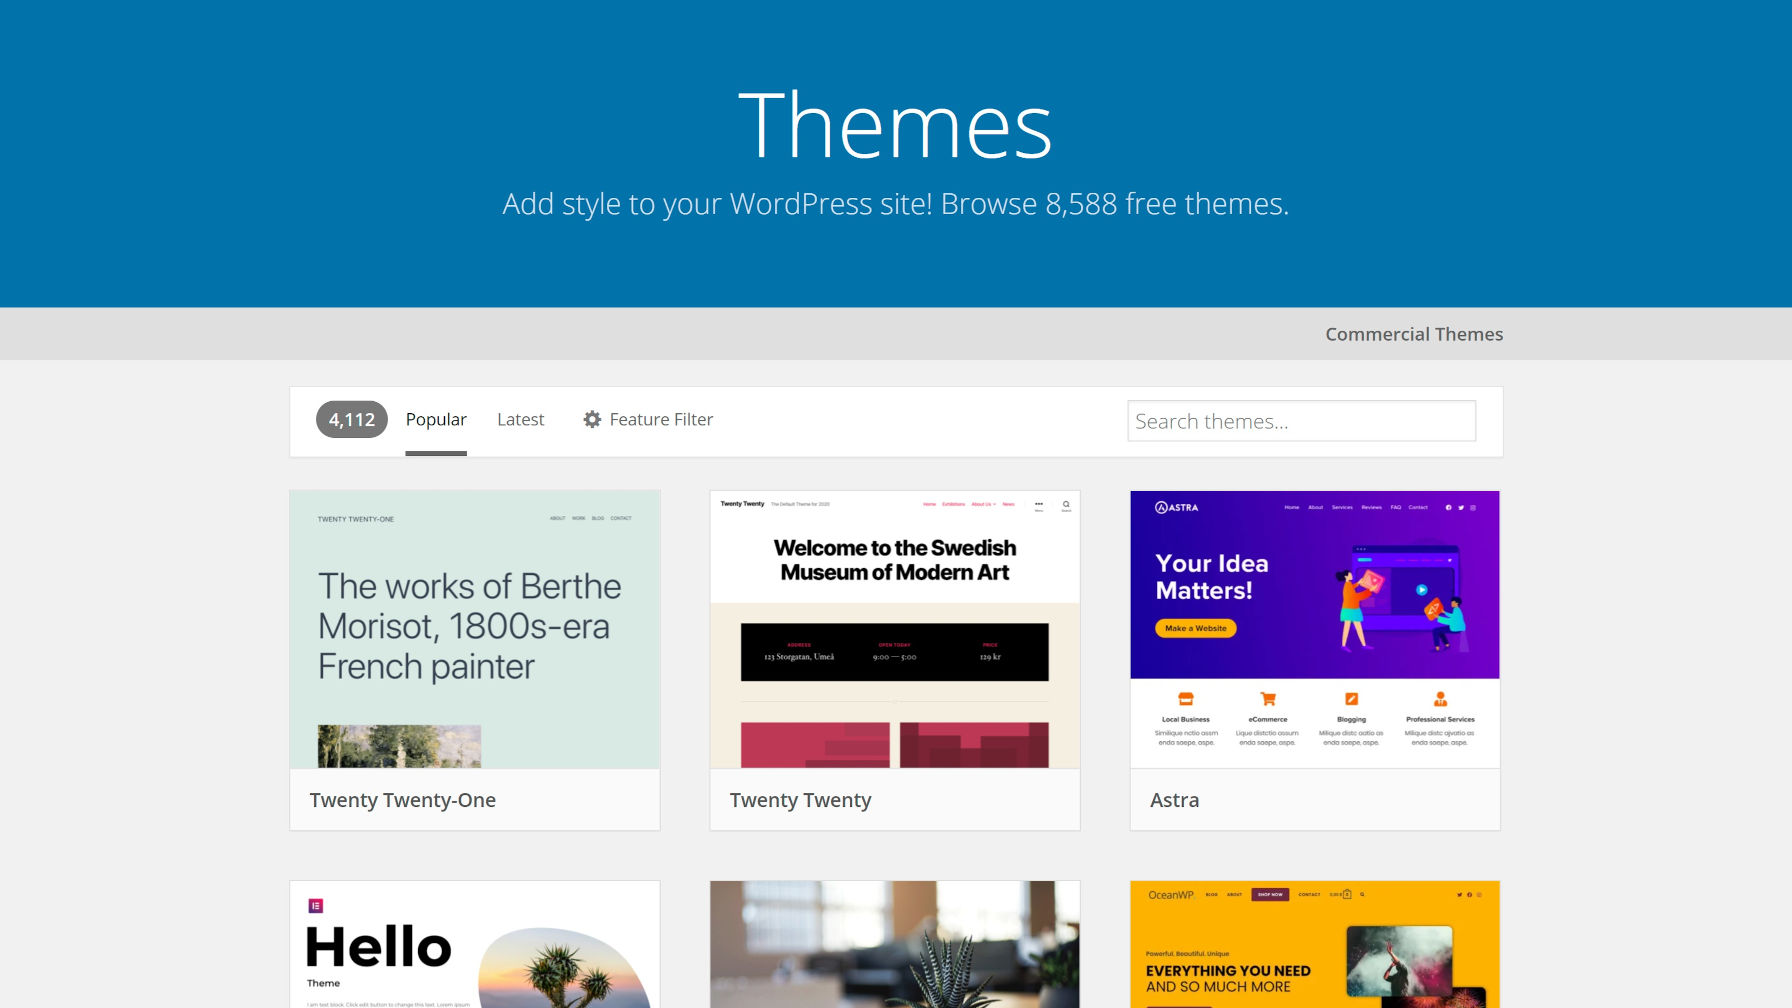 Next Phase of the WordPress Theme Review Overhaul: Open Meeting and Call for Feedback